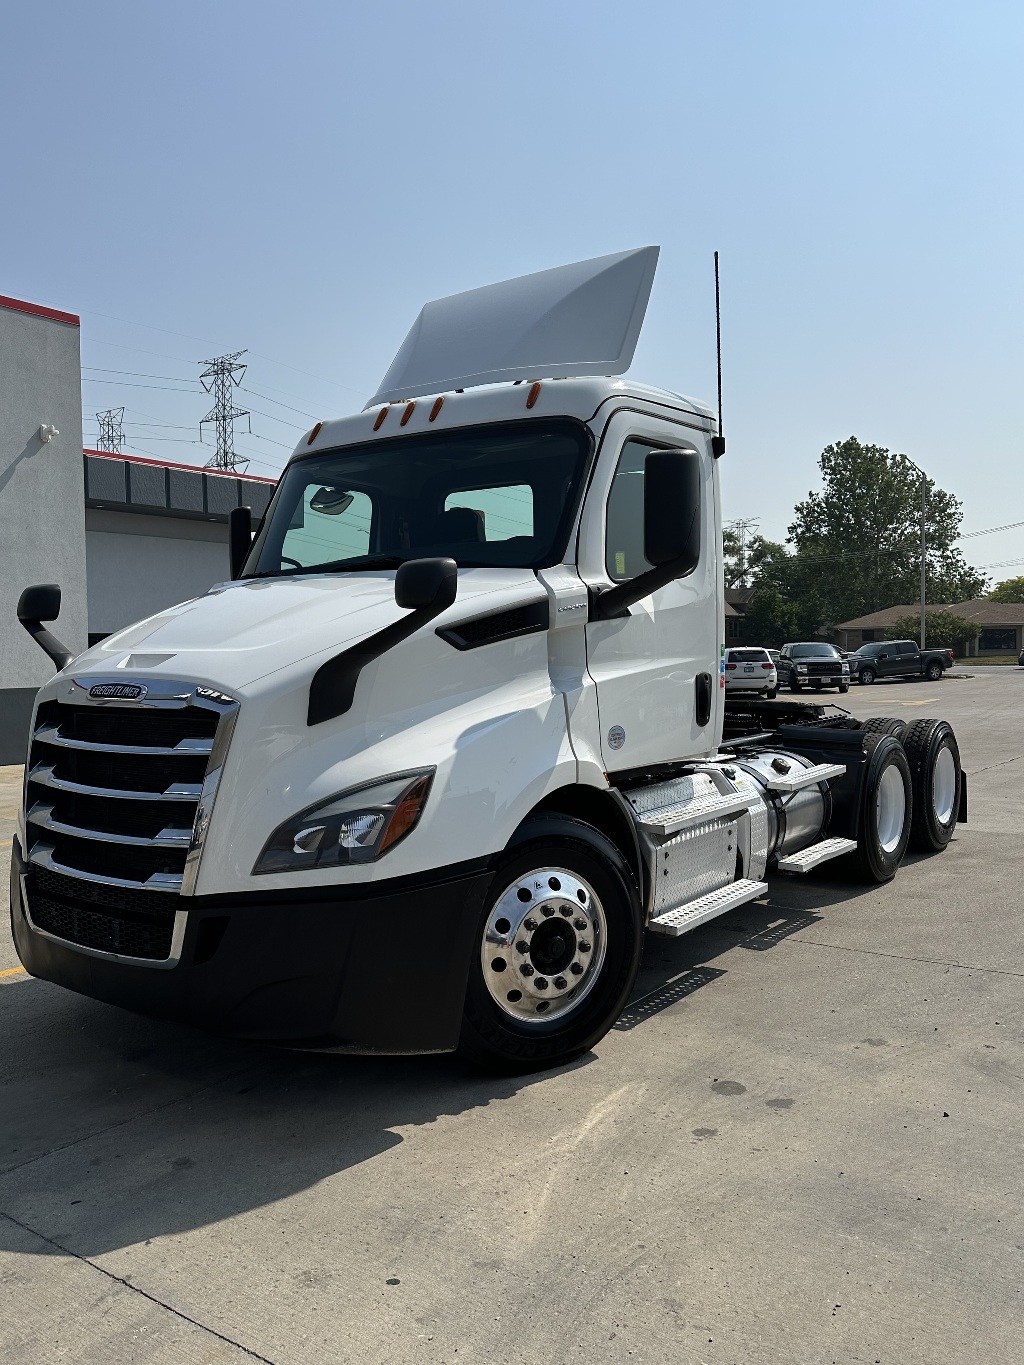 2018 FREIGHTLINER Cascadia 116 Tandem Axle Daycab #1